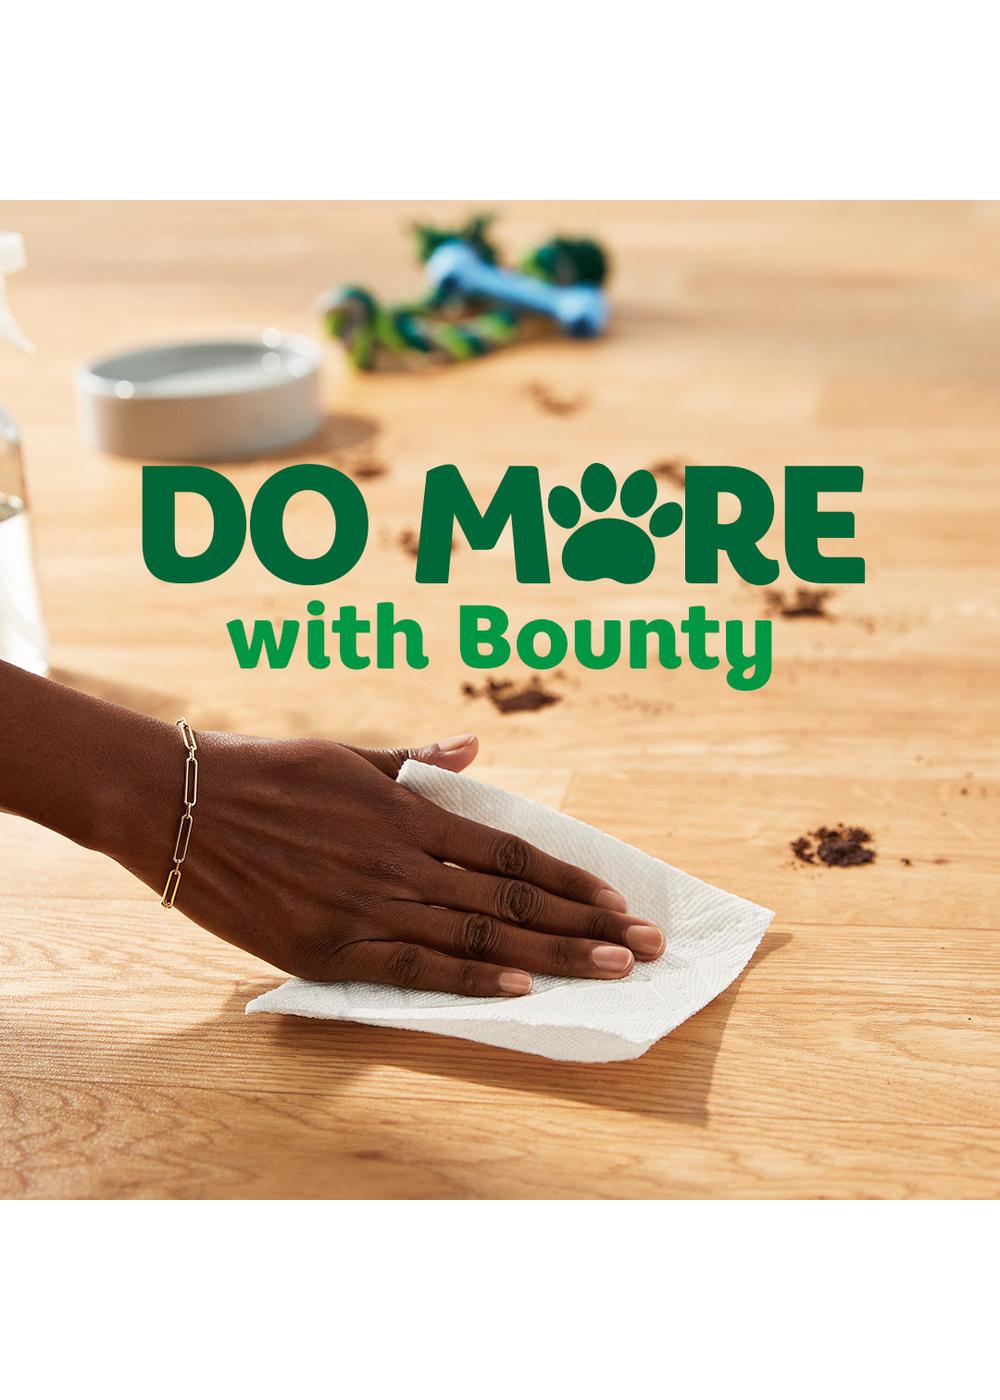 Bounty Select-A-Size Triple Roll Paper Towels; image 15 of 15